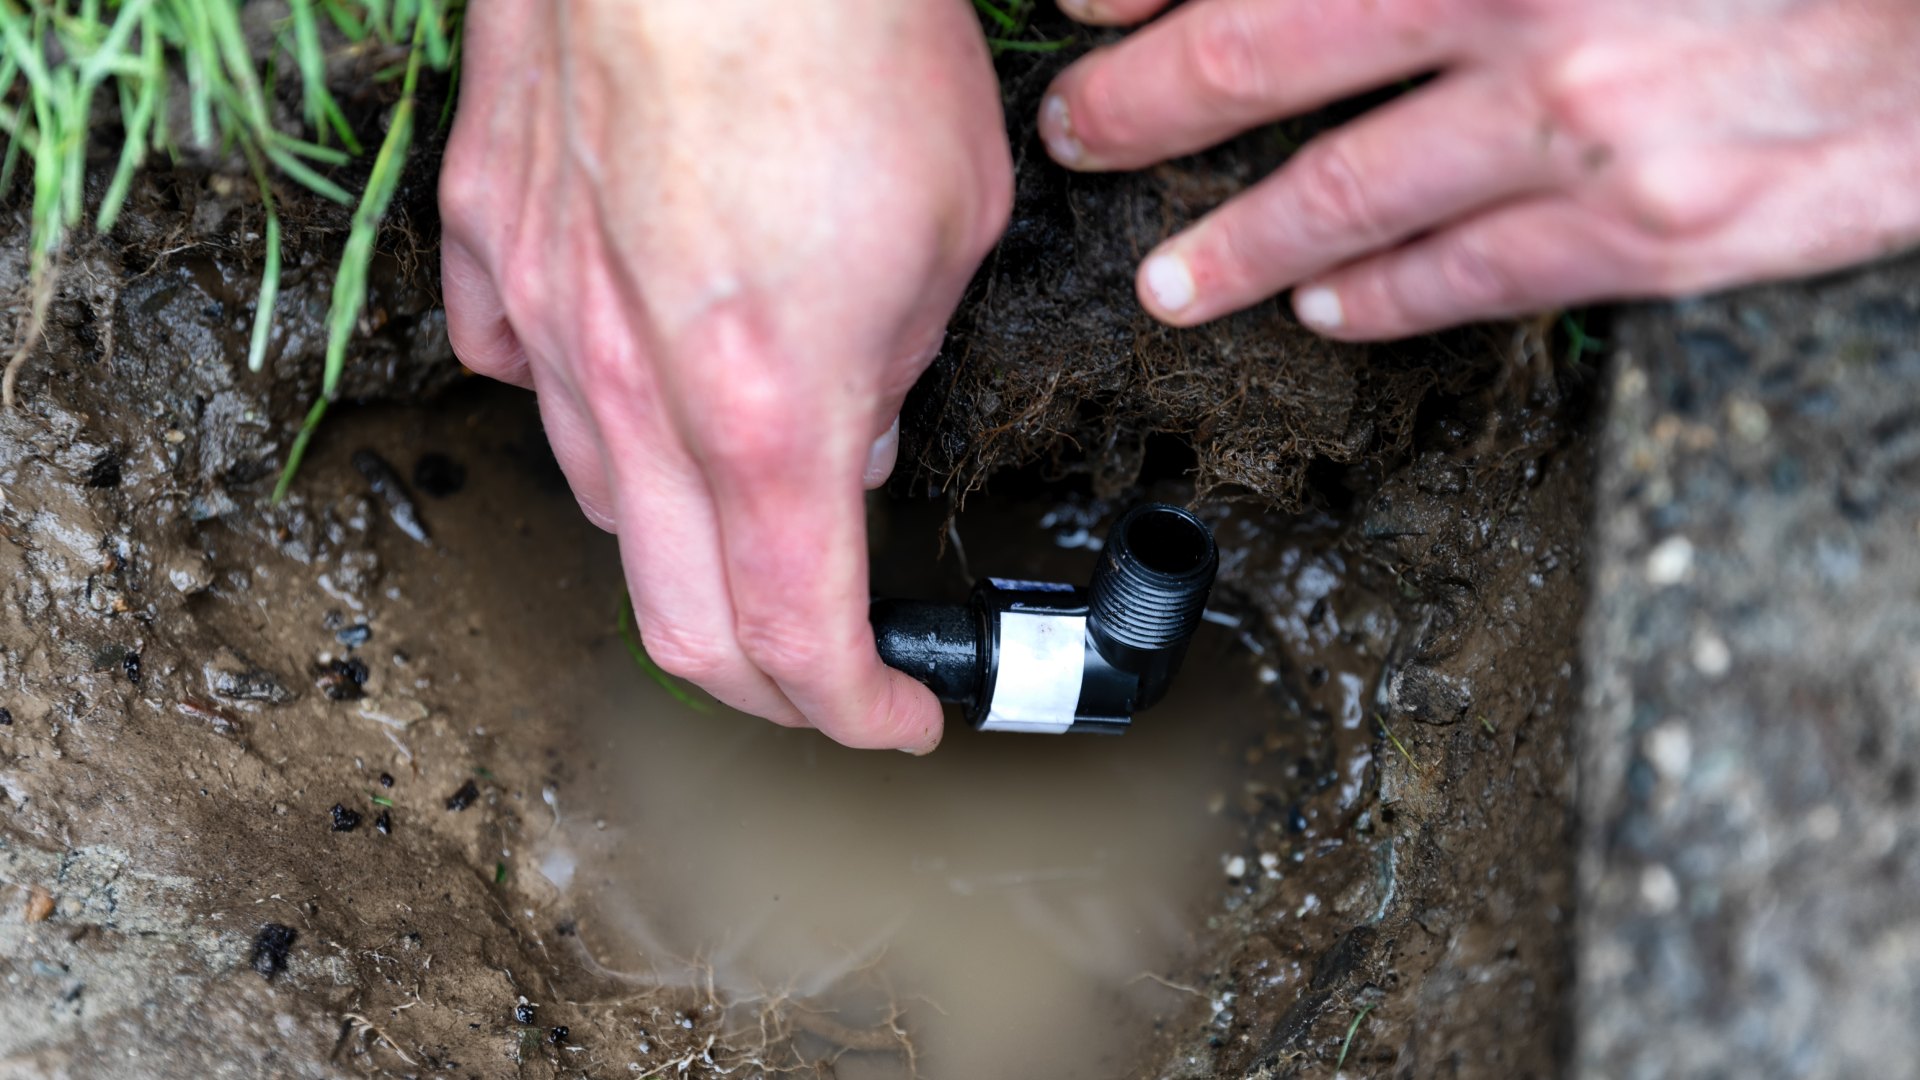 Irrigation tech repairing a faulty irrigation system in Sioux Falls, SD.